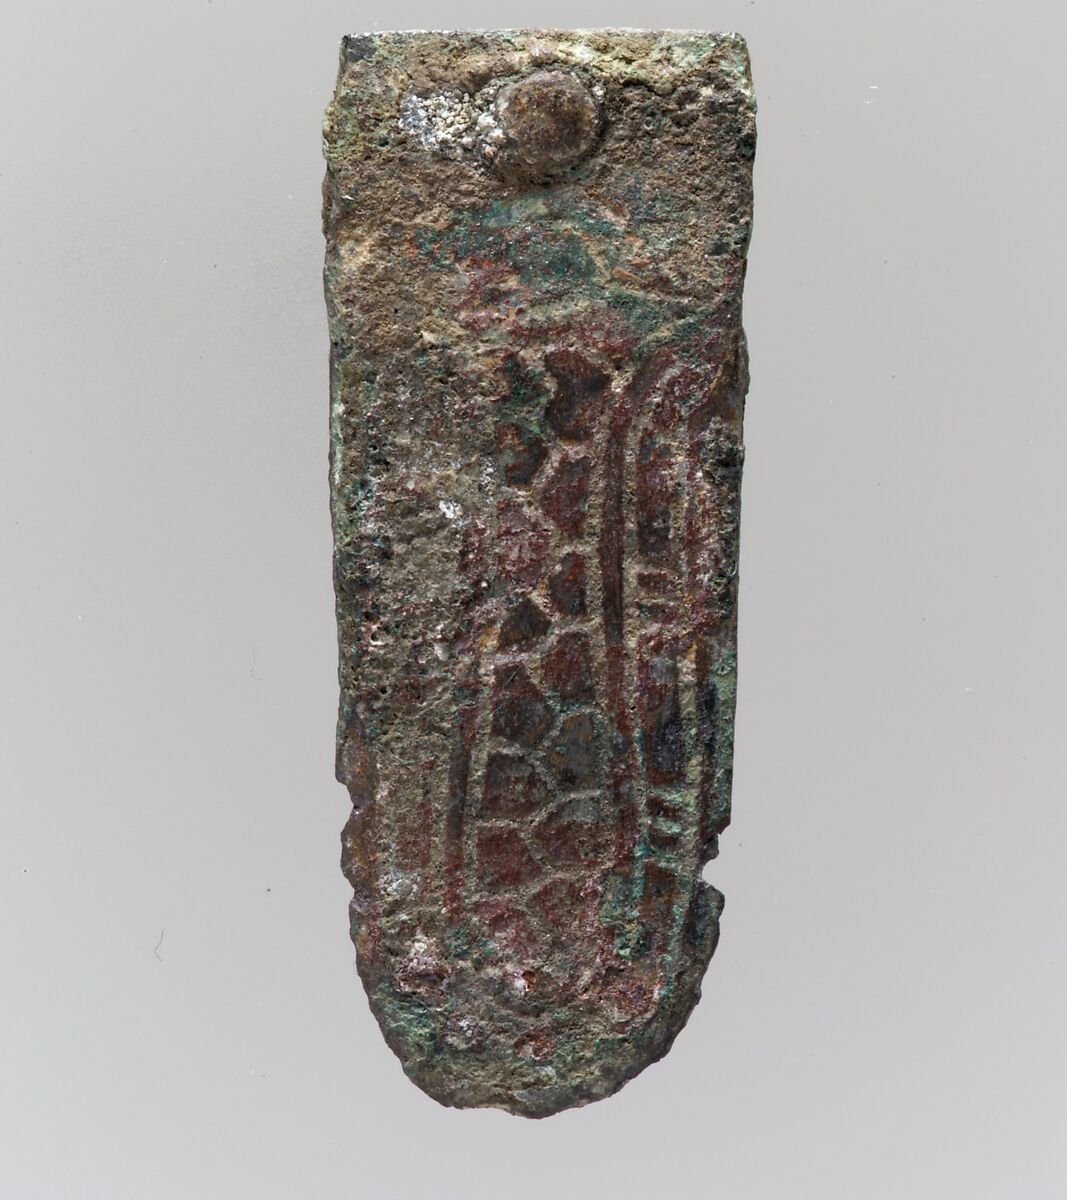 Ferret, Copper alloy, "tinned" surface, Frankish 